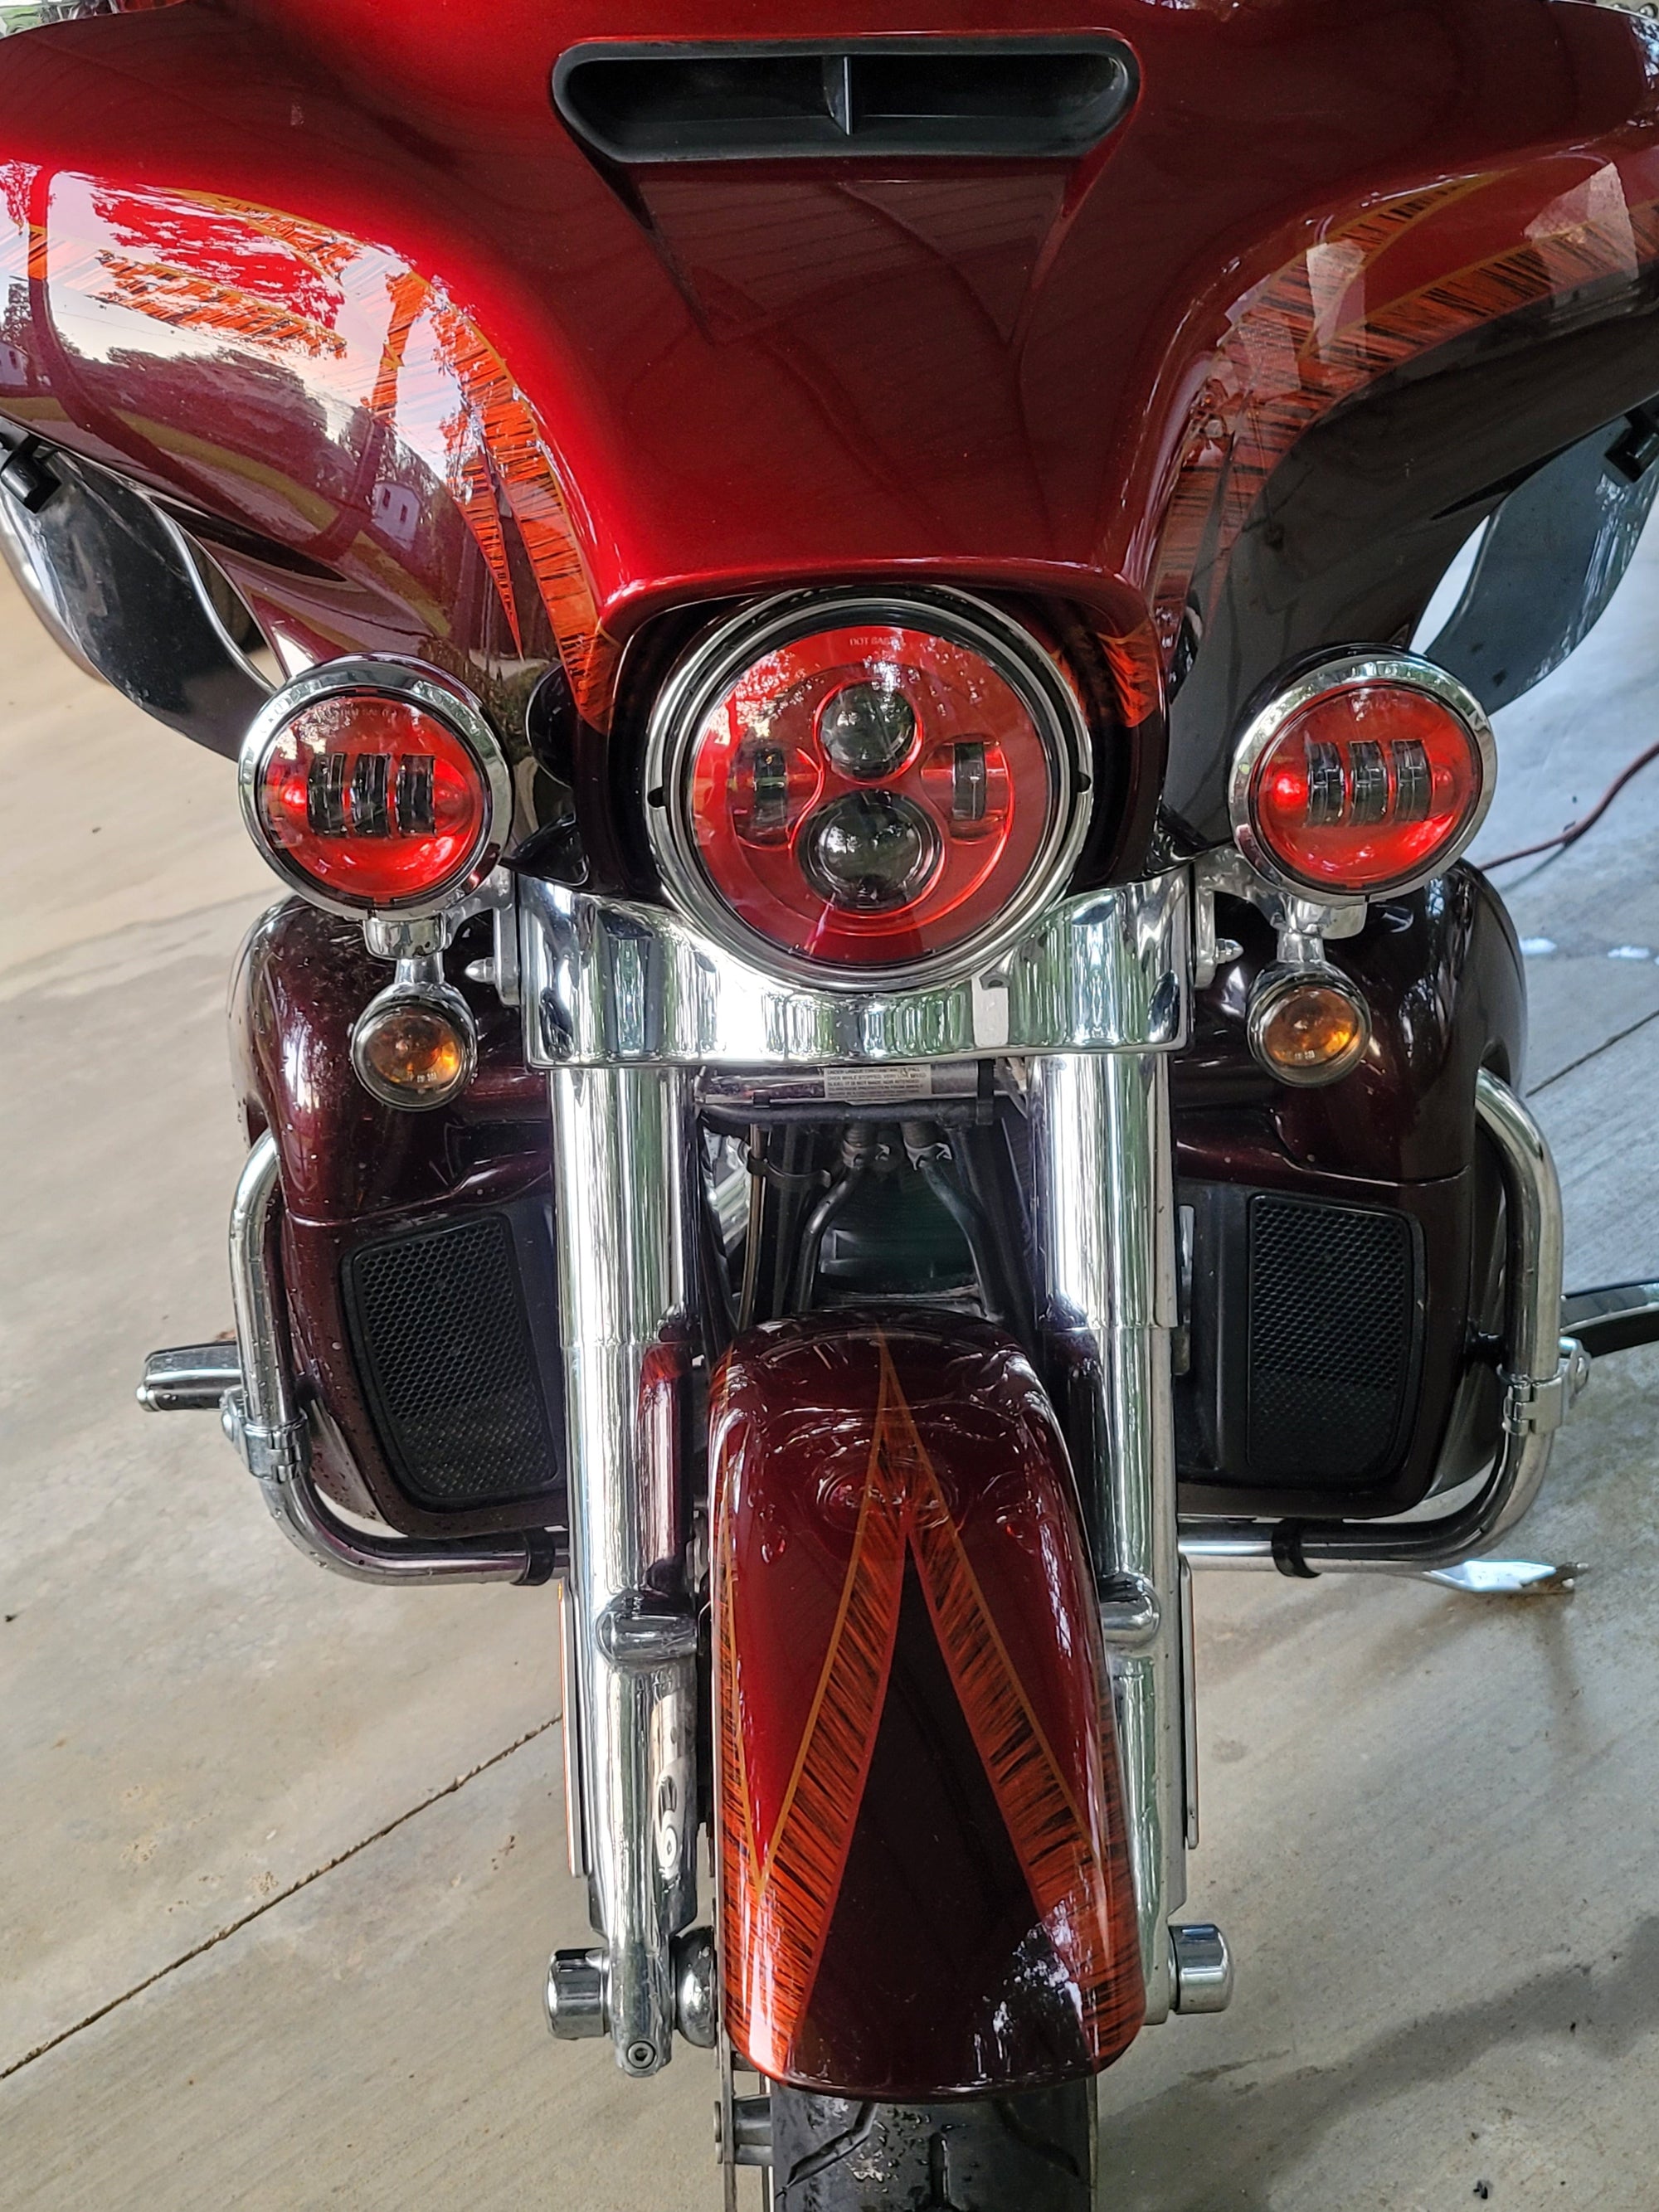 The Color-Matched Brilliance of Eagle Lights LED Headlight and Passing Light Kit for Harley Davidson and Indian Motorcycles